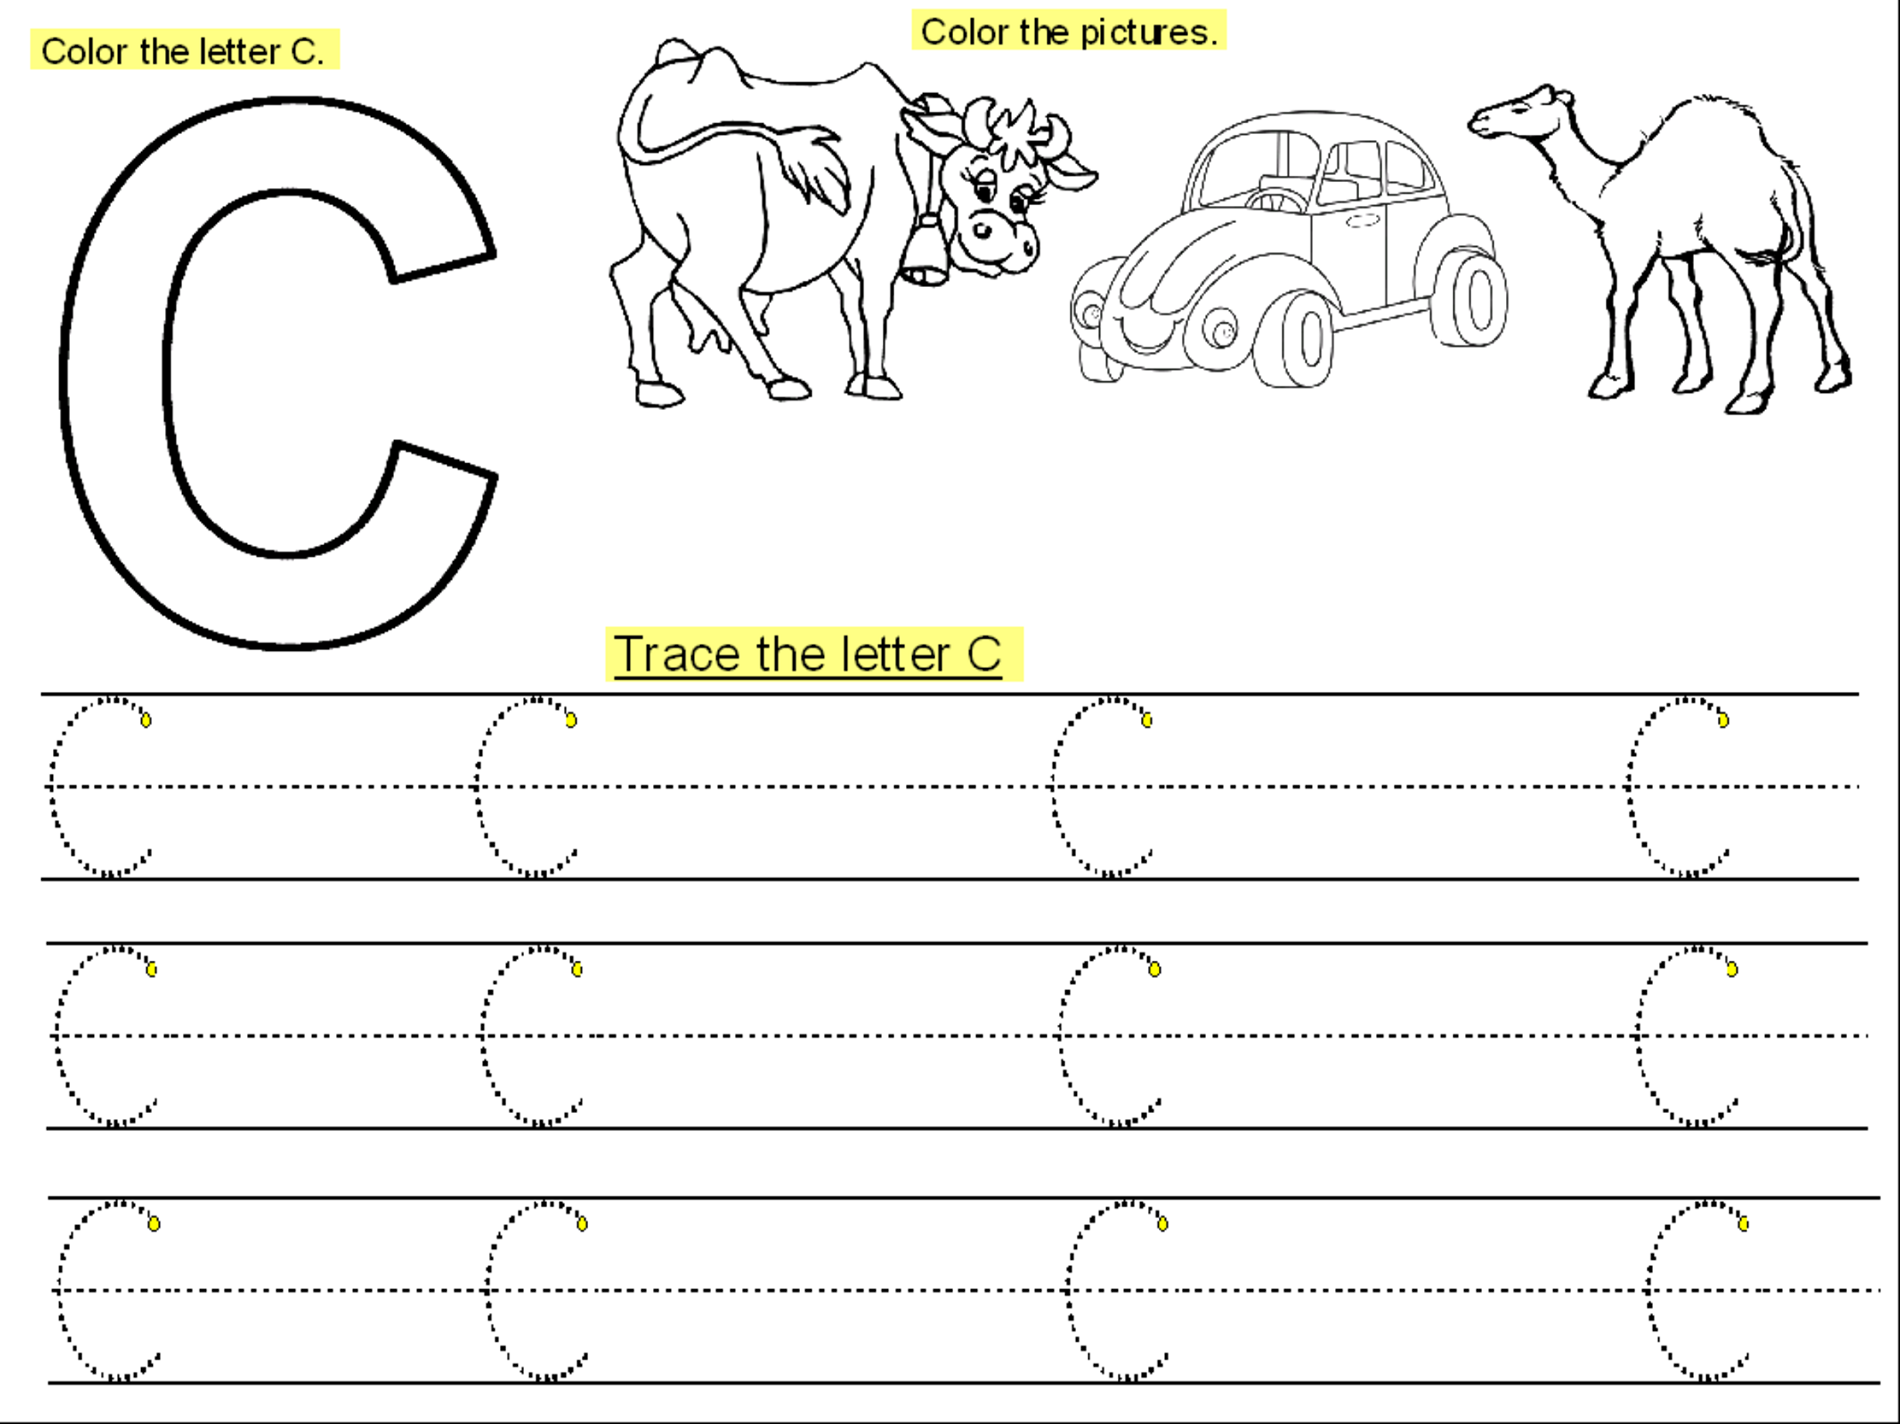 Trace the Letter C Worksheets Activity Shelter